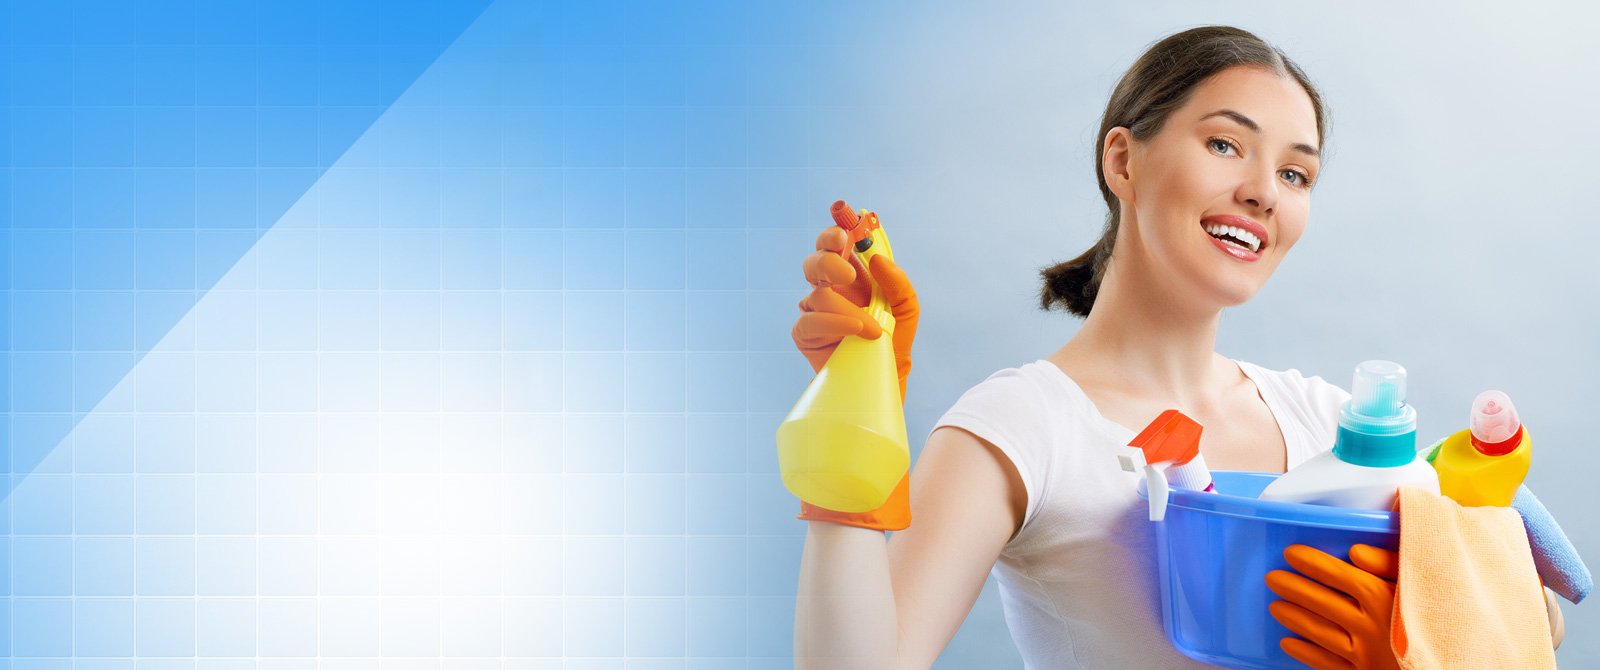 What Are The Individual Service Requests On The Platform Of Adelaide End Of Leases Cleaning Services?